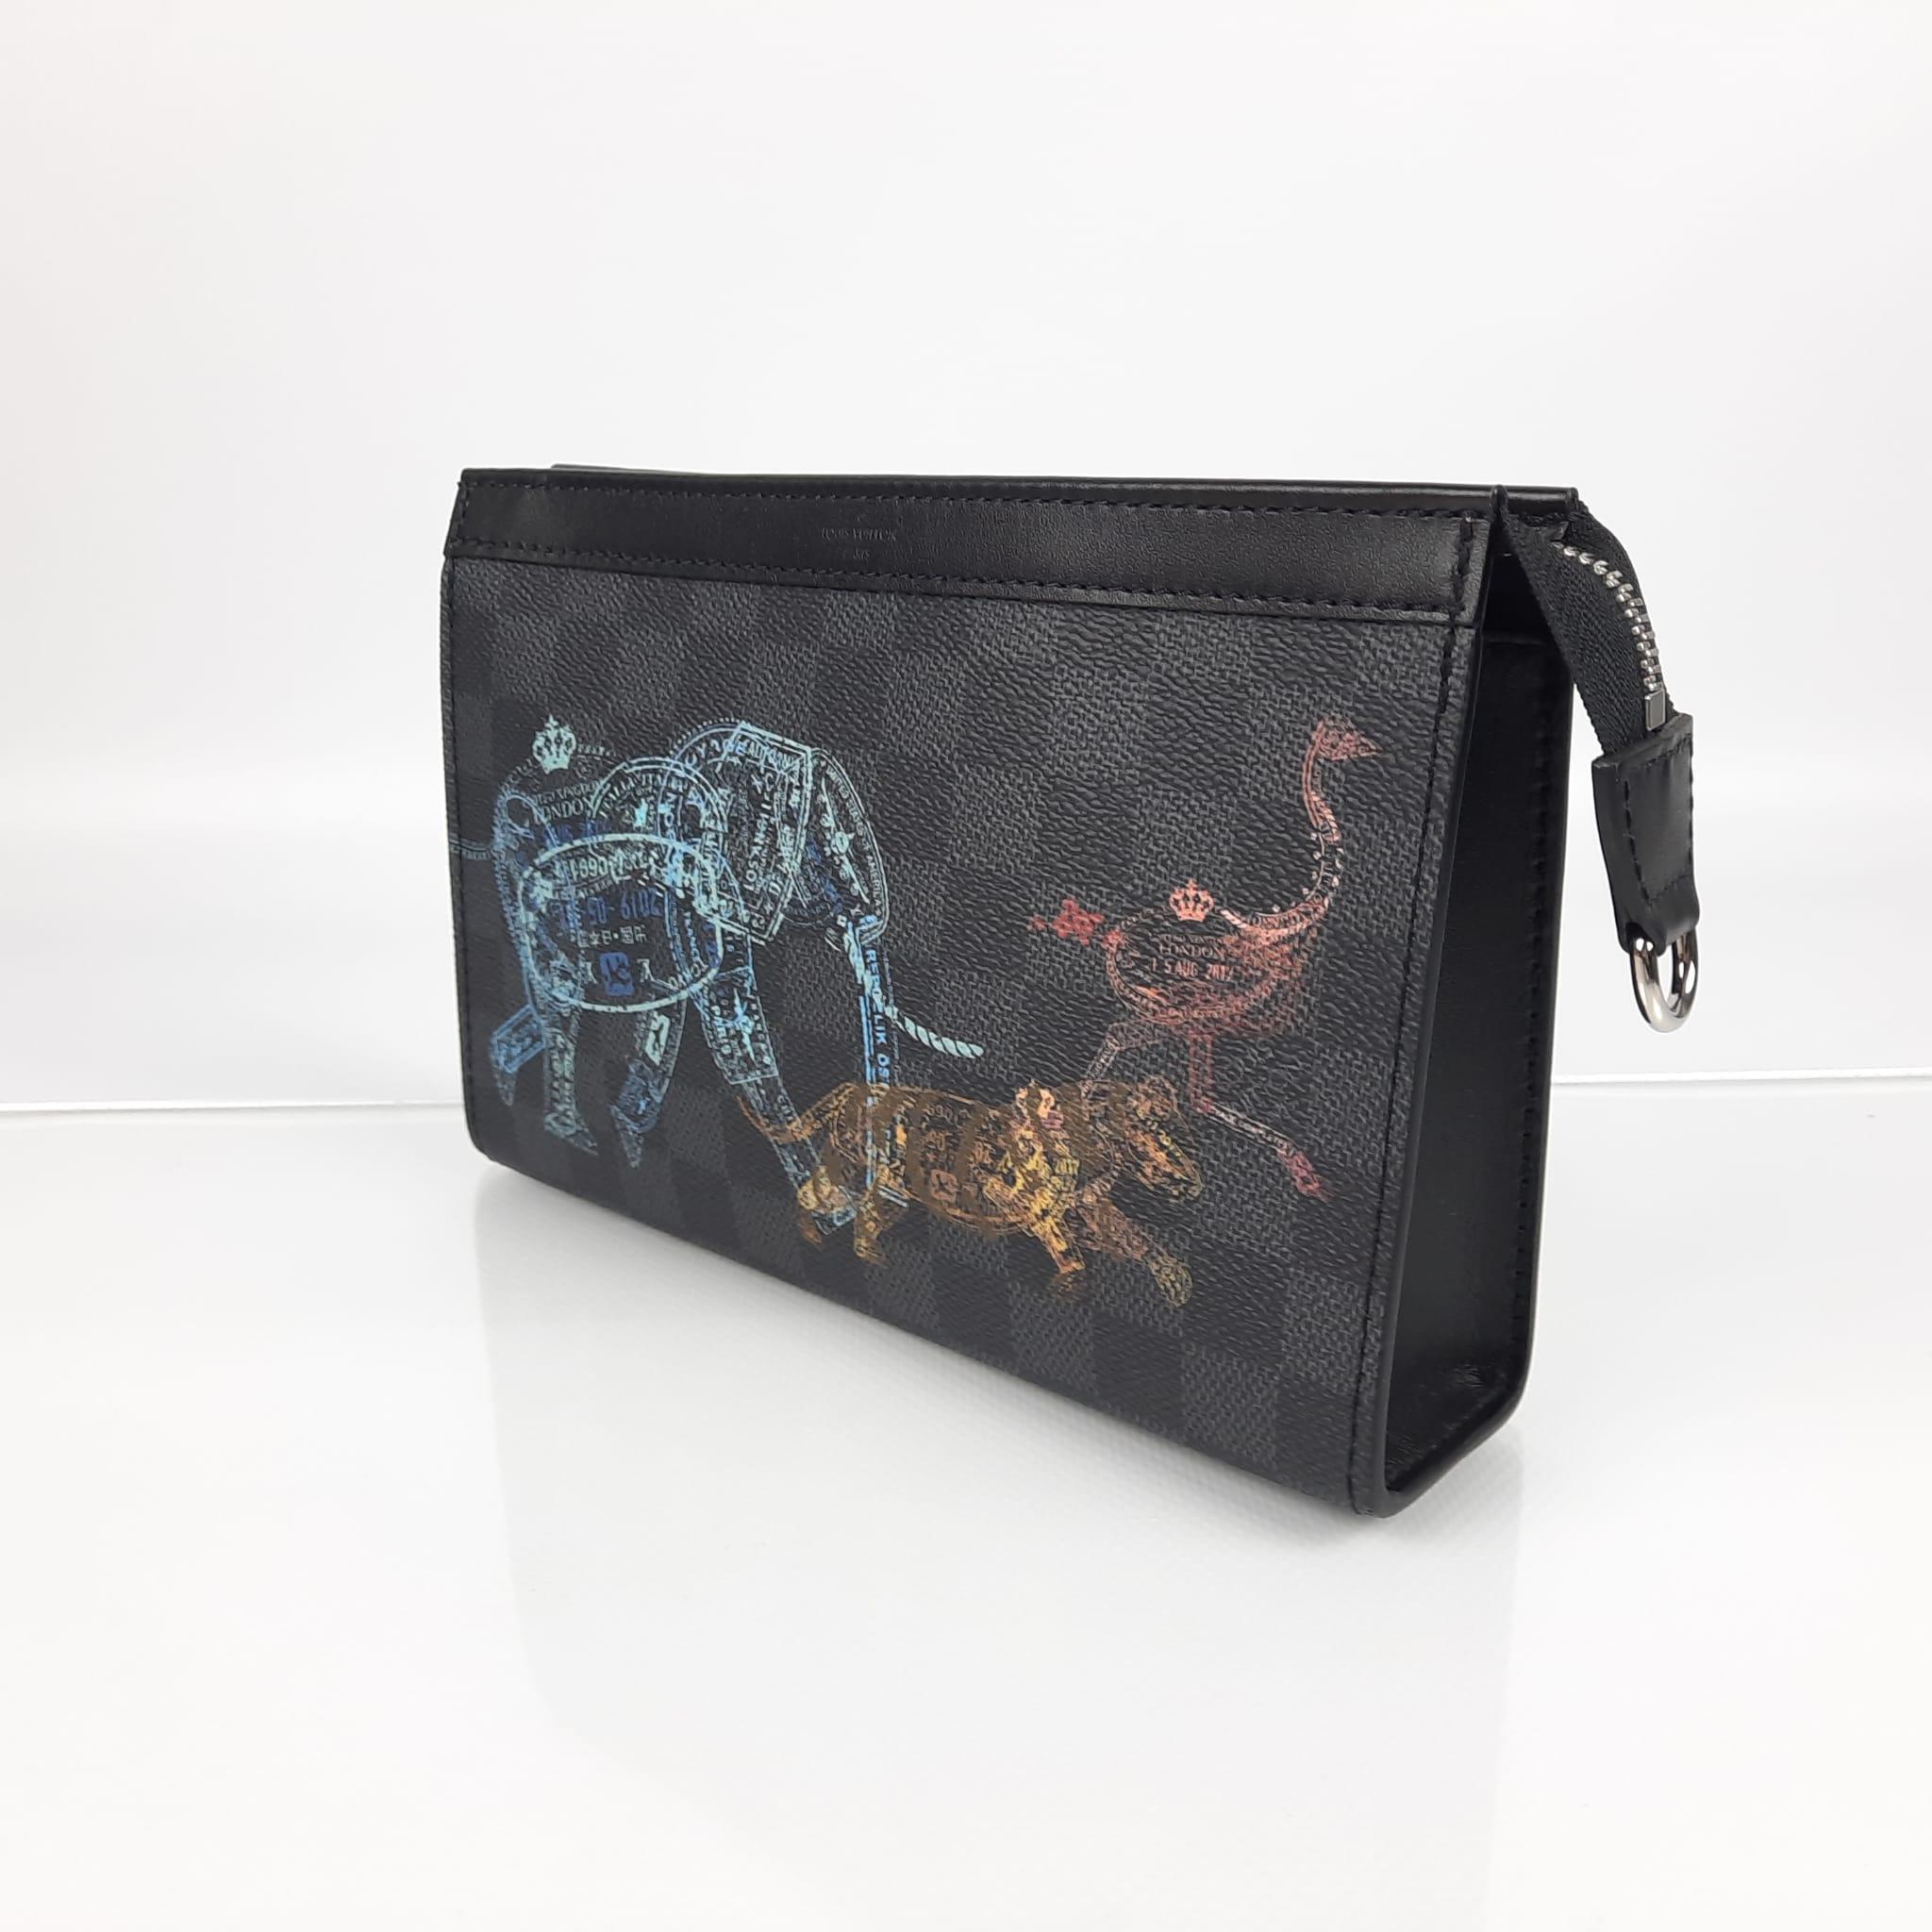 The pastel print made up of passport-style stamps depicts an elephant, a tiger and an ostrich wandering over the checkered pattern of the Damier Graphite canvas of this Gaston Wearable wallet. Inspired by the Pochette Voyage, it features a removable